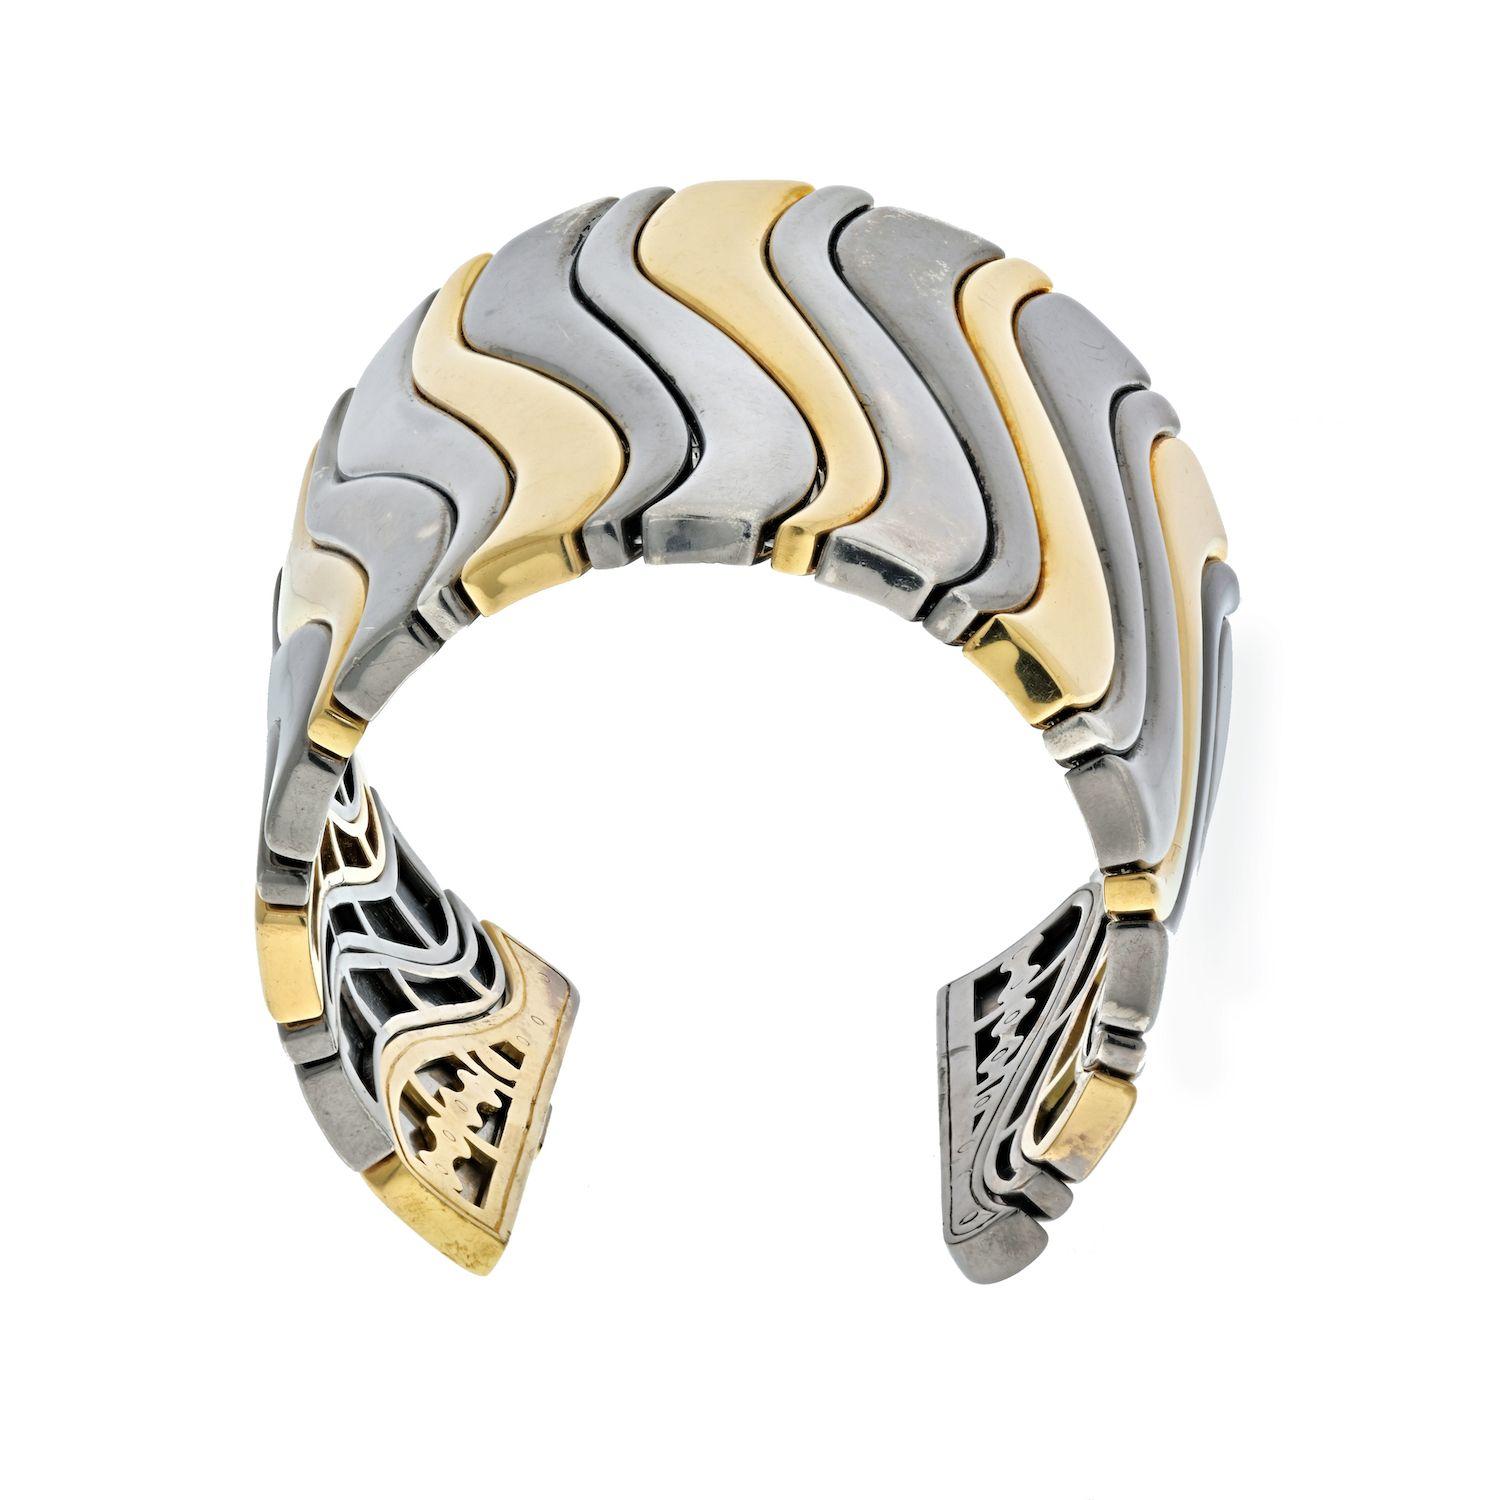 The flexible cuff-bracelet composed of contoured bands, set in alternating intervals weighing approximately 300 grams, internal circumference approximately 7.25 inches at the widest, signed Marina B.
Due to the way the cuff was designed we recommend